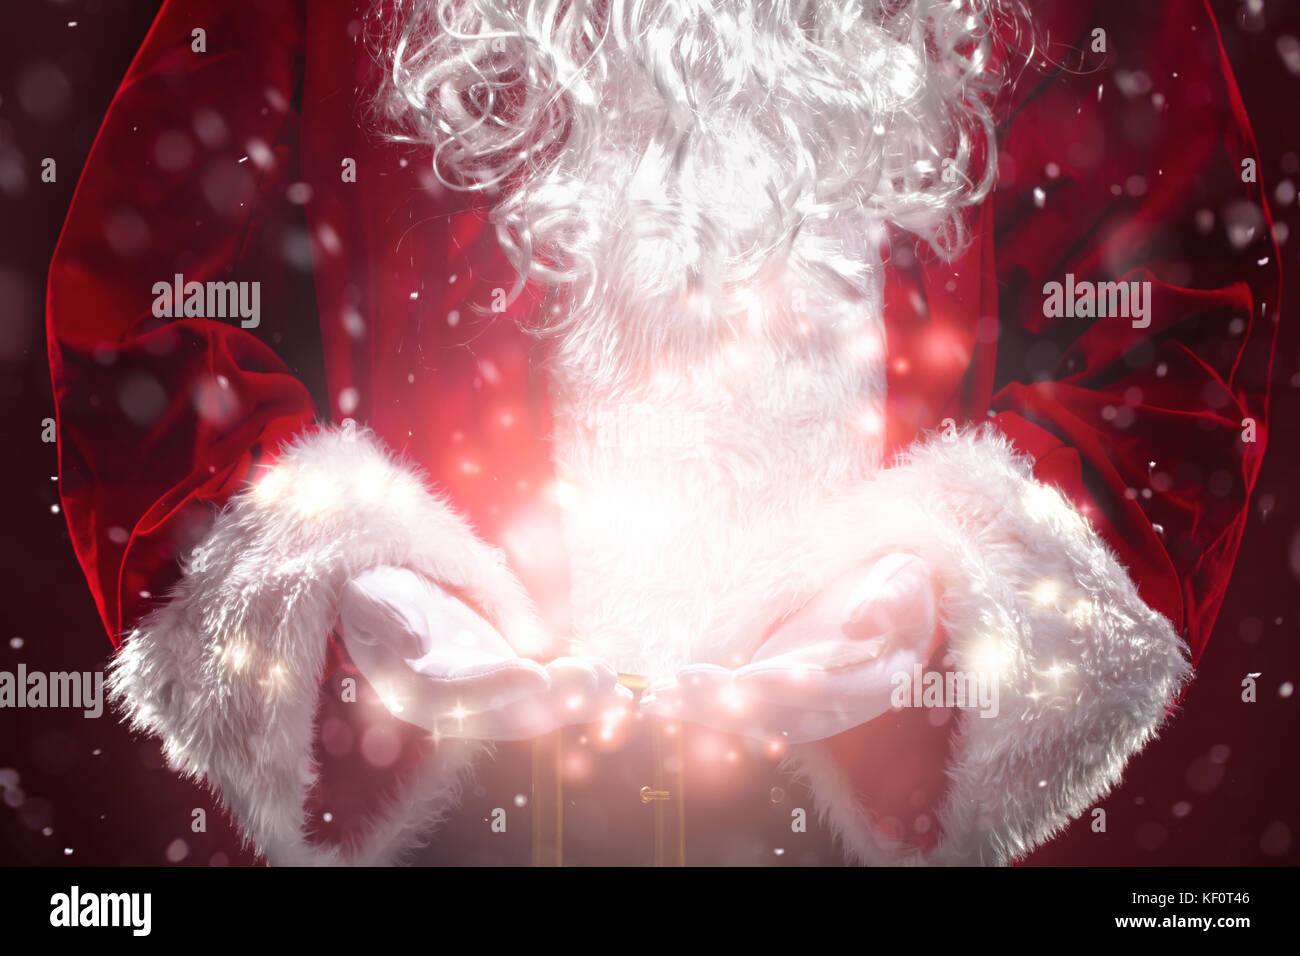 Santa Claus with magic Christmas lights in hands Stock Photo